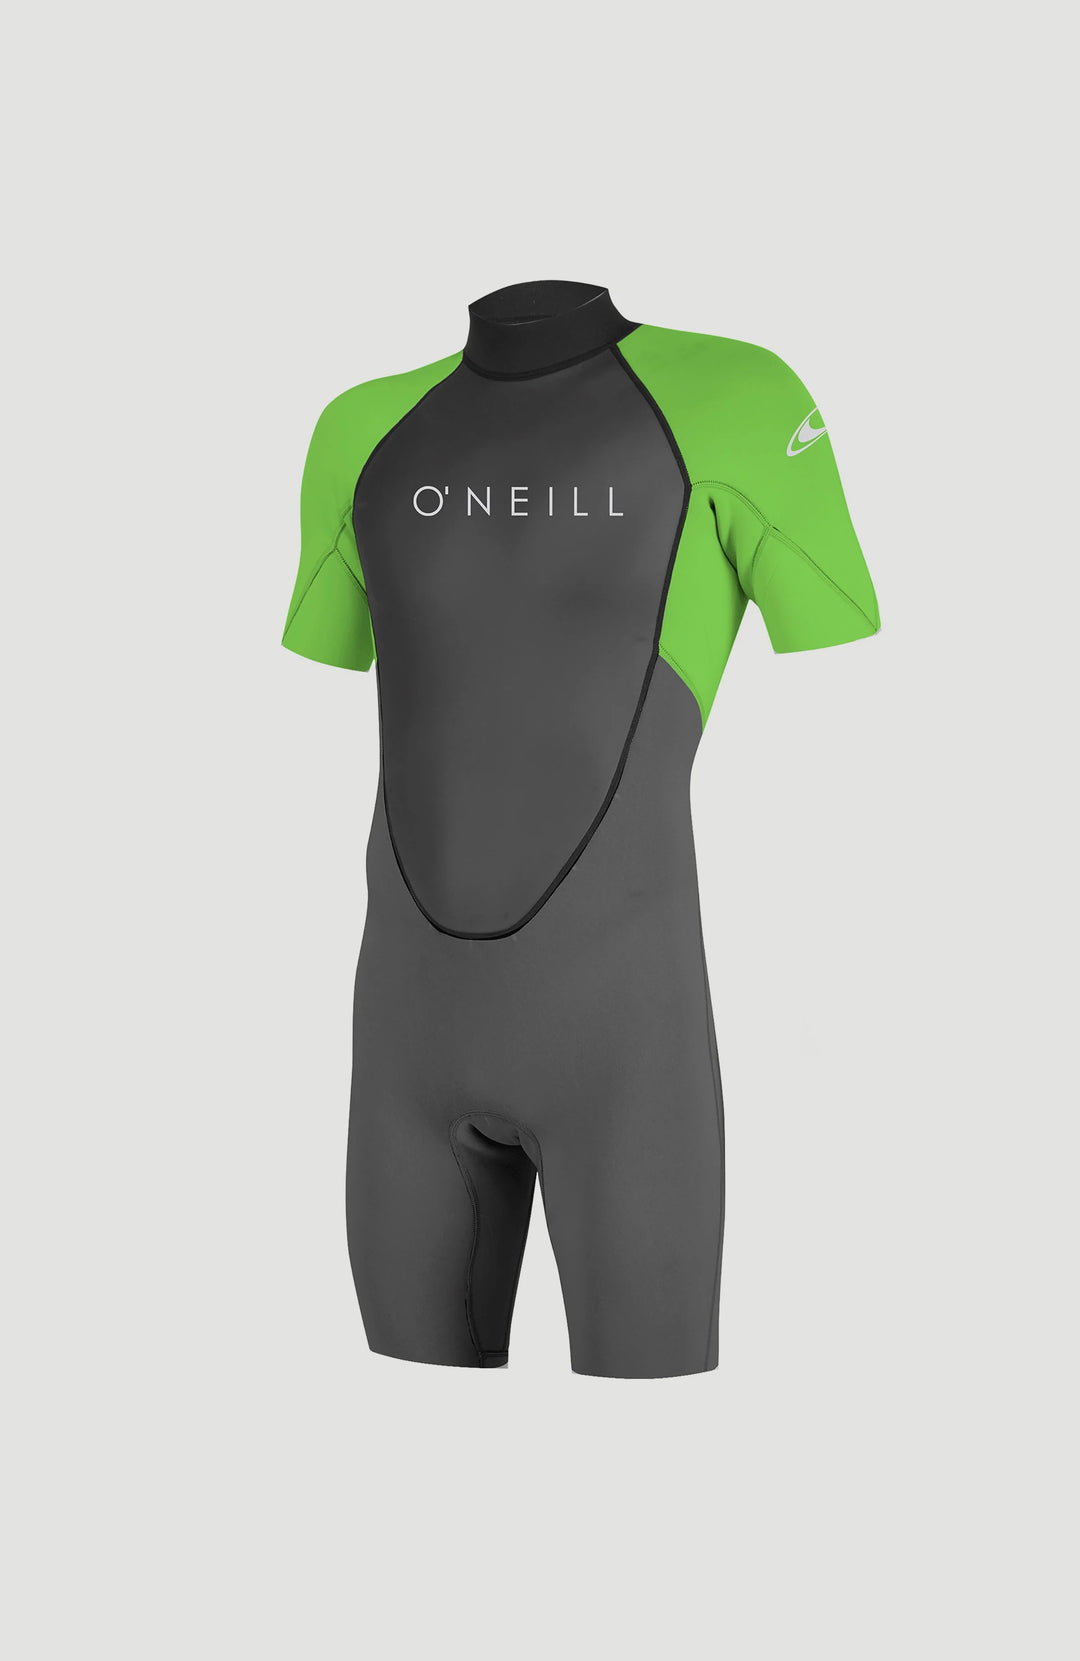 O'Neill Reactor-2 BZ 2mm Men's Spring Shorty Wetsuit - Graphite/Dayglo - 5041